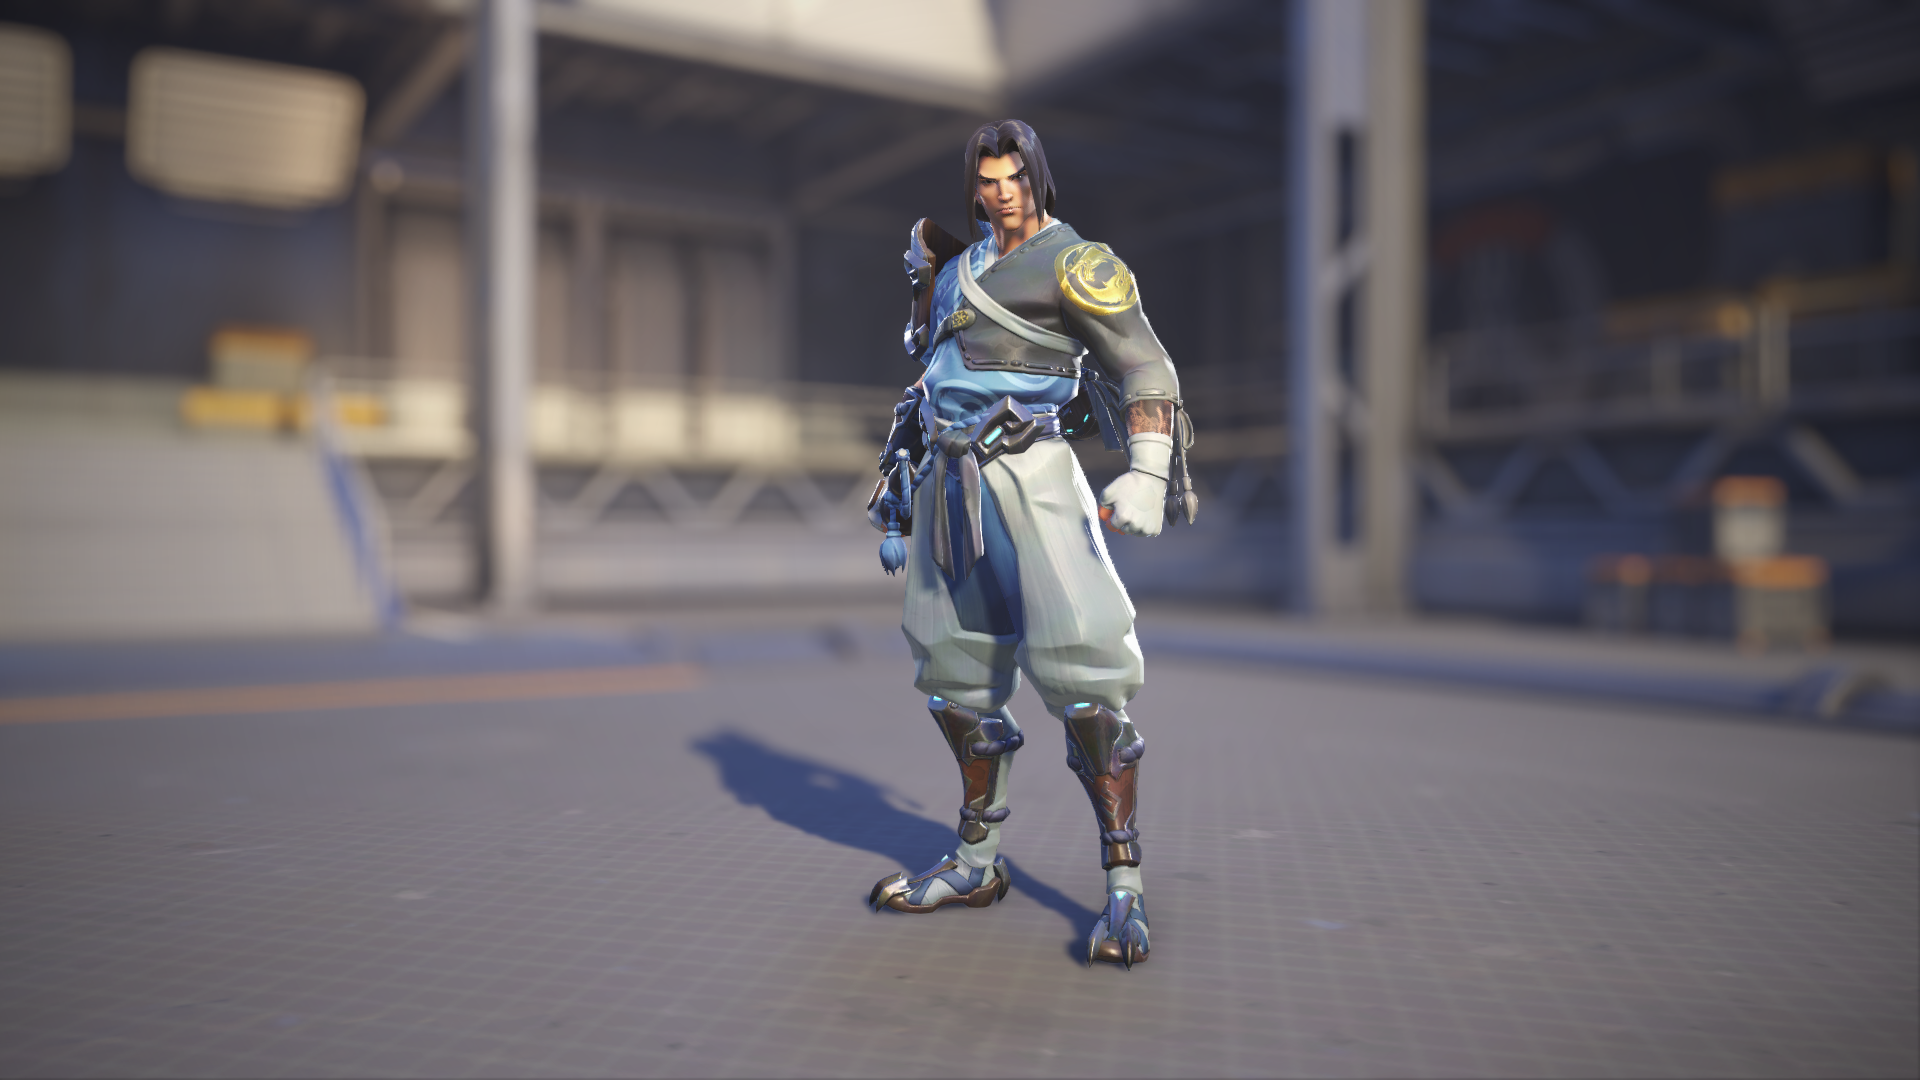 Hanzo models his Young Master skin in Overwatch 2.